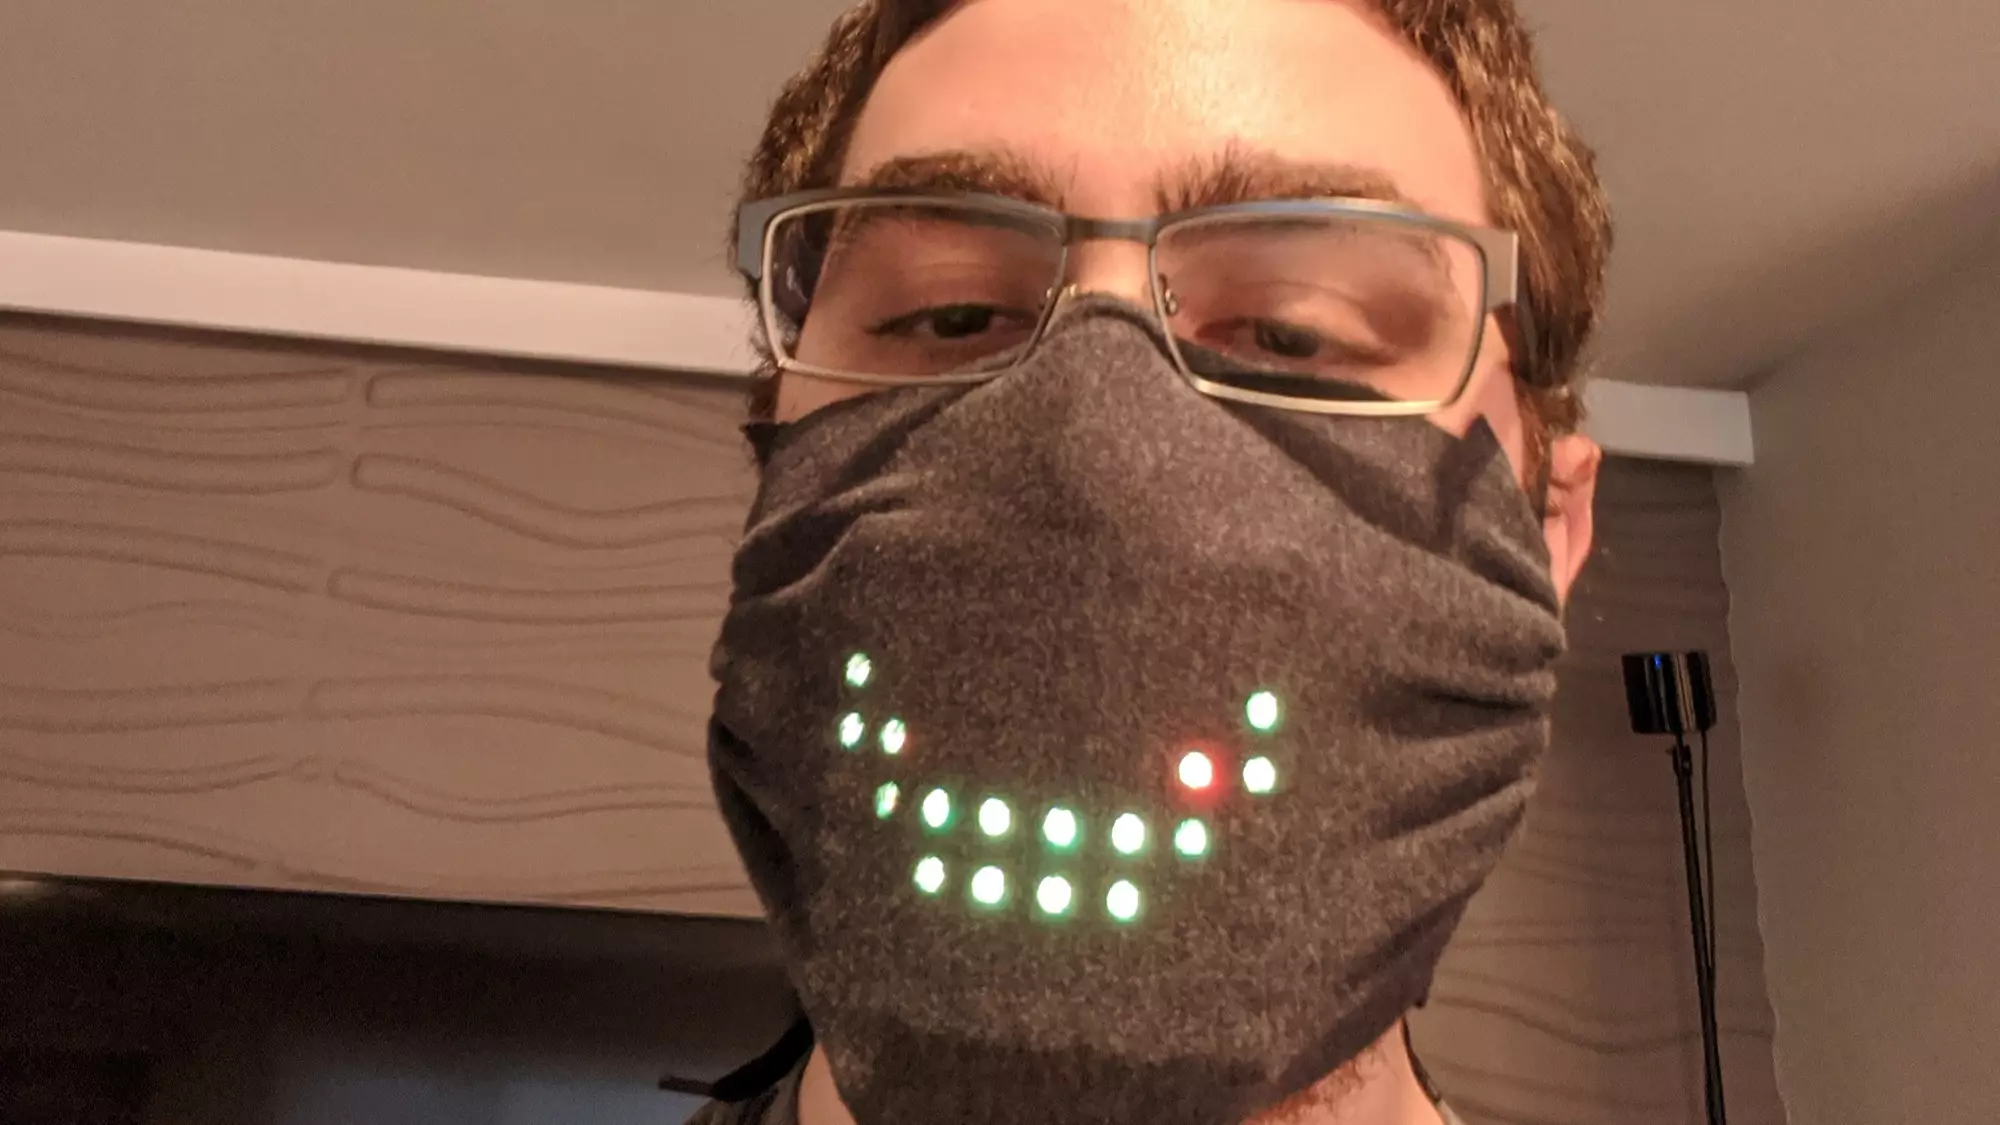 Computer Programmer Creates Voice Controlled Face Mask With Moving LED Mouth